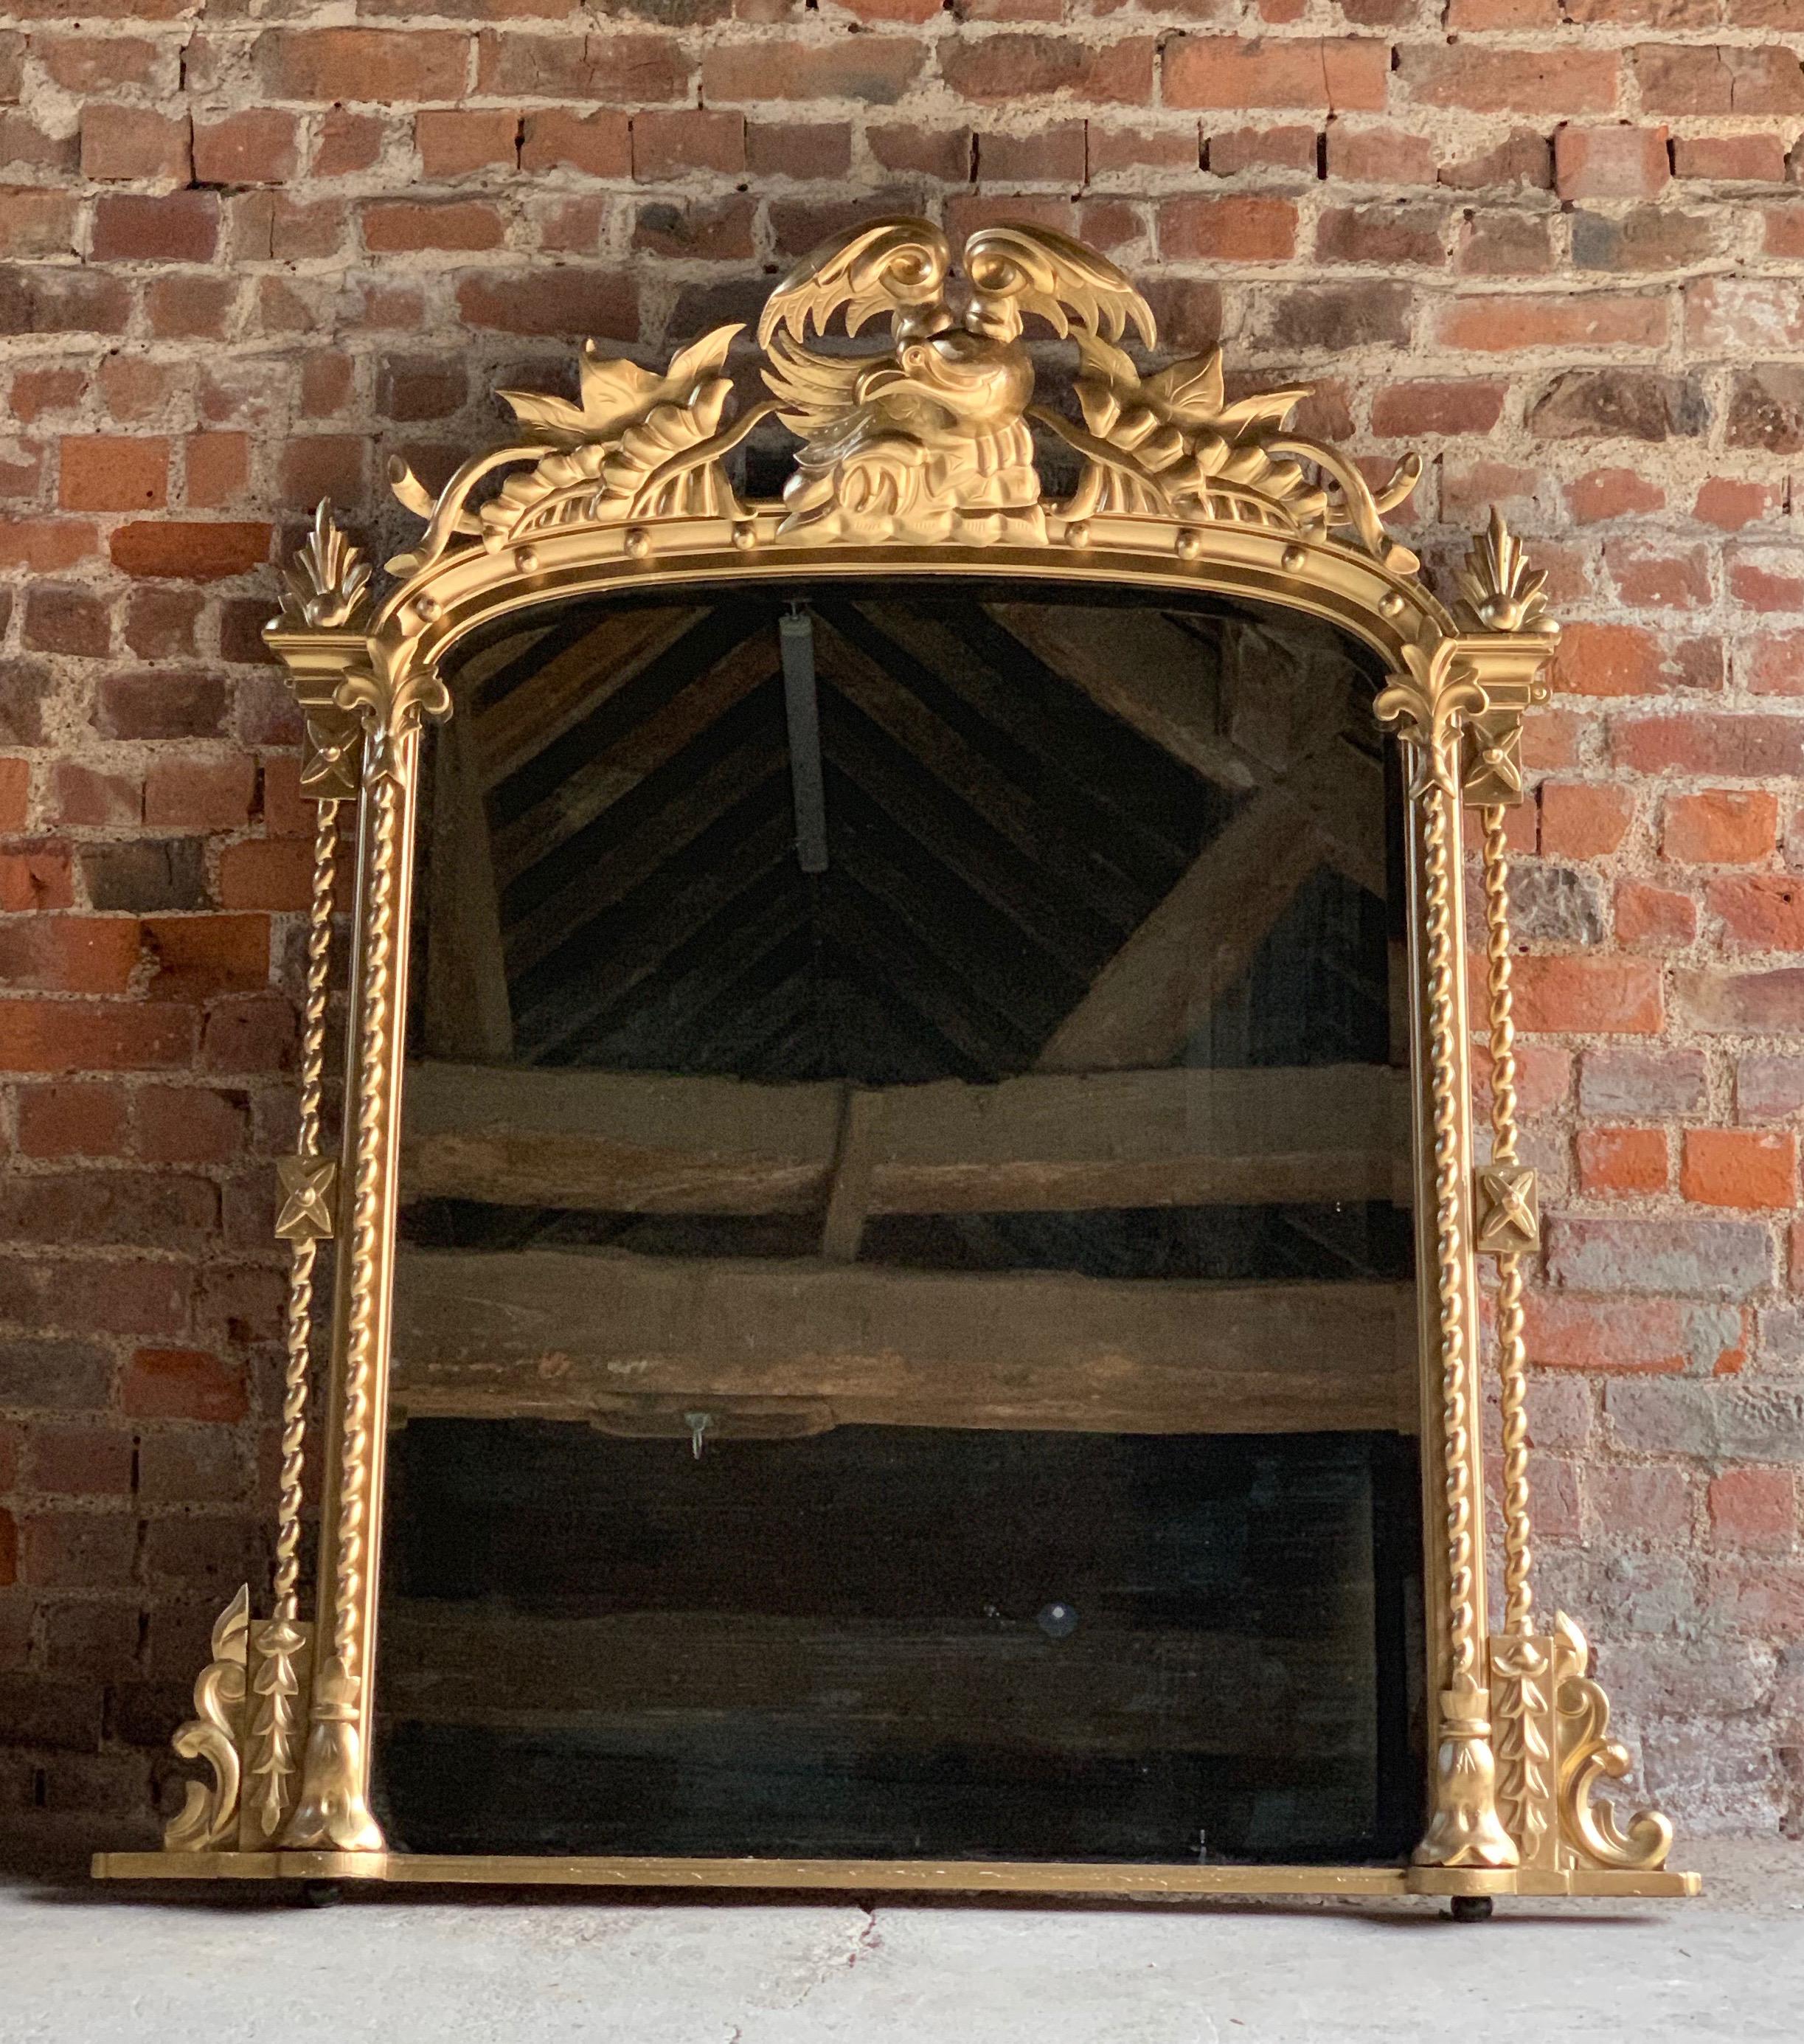 Antique 19th century French Louis XV style overmantle mirror, circa 1875.

Magnificent Antique 19th century French Louis XV style overmantel mirror, circa 1875, the gold painted wooden frame richly adorned with a large central cartouche, with